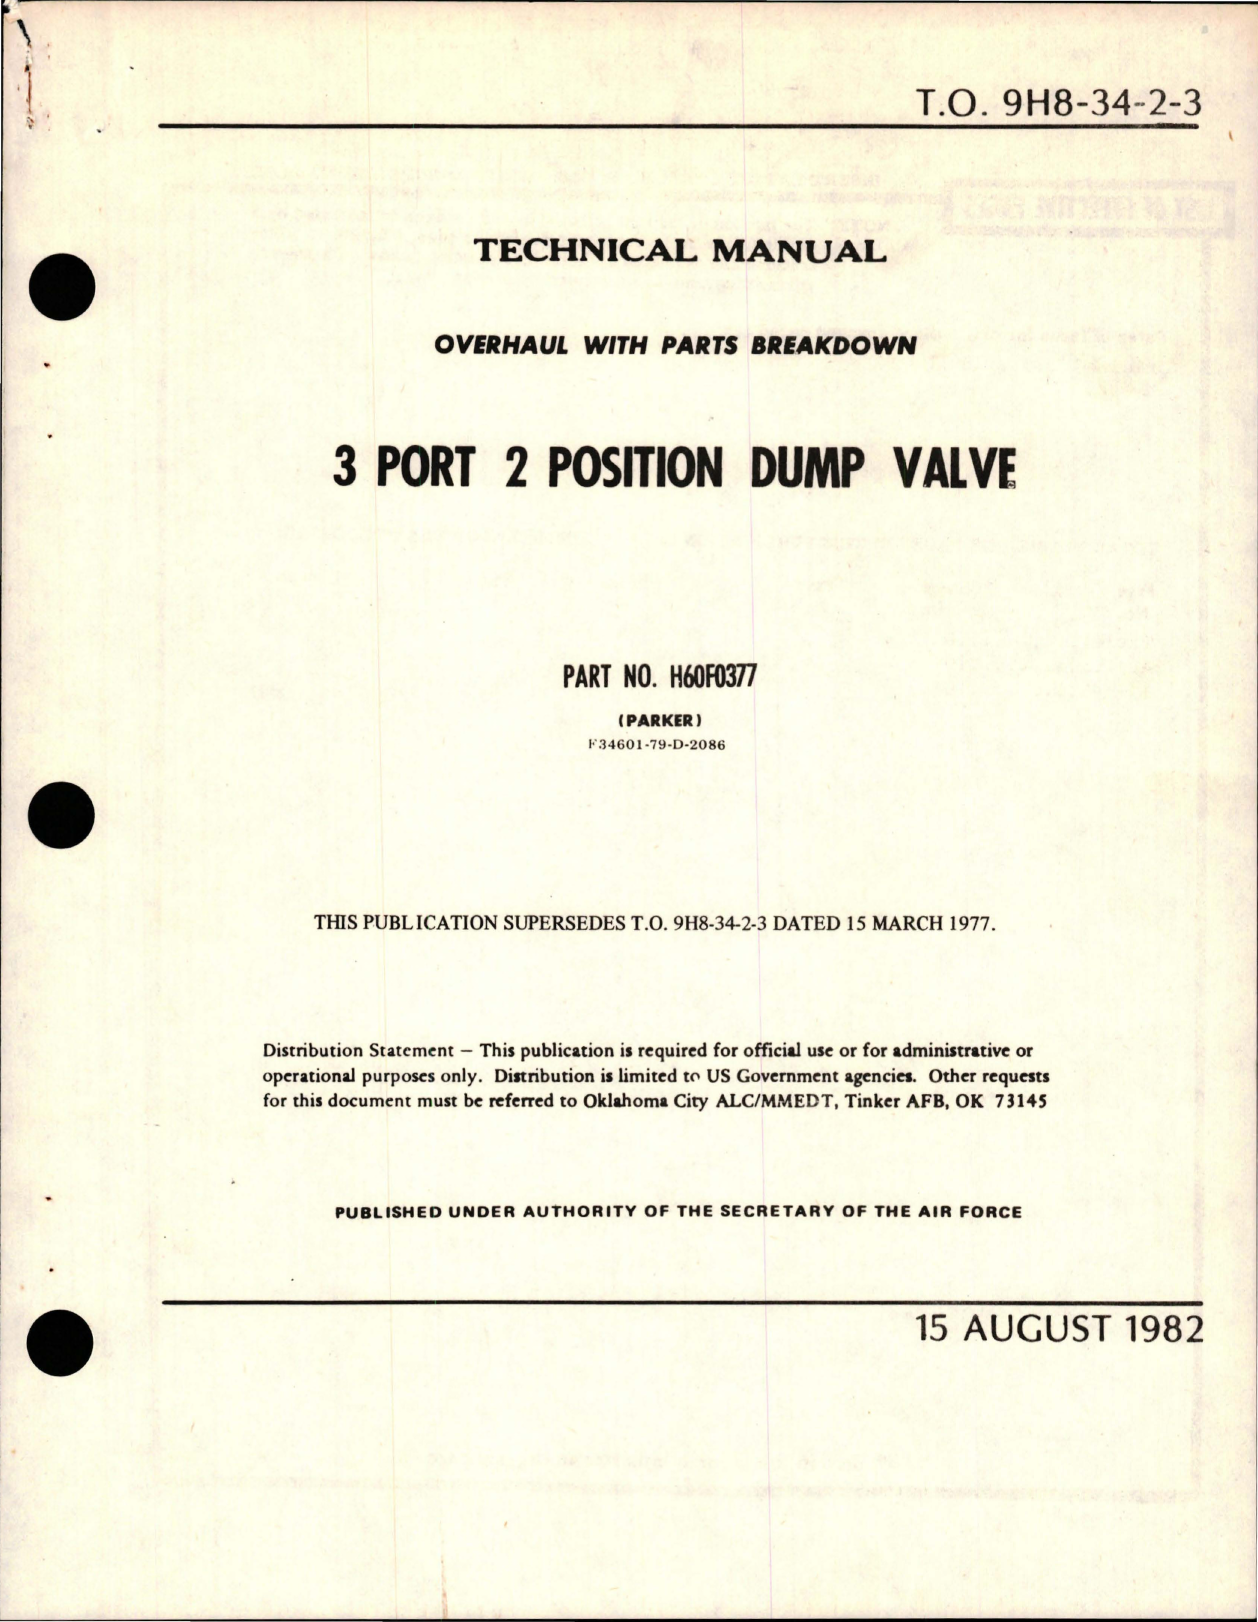 Sample page 1 from AirCorps Library document: Overhaul with Parts Breakdown for 3 Port 2 Position Dump Valve - Part H60F0377